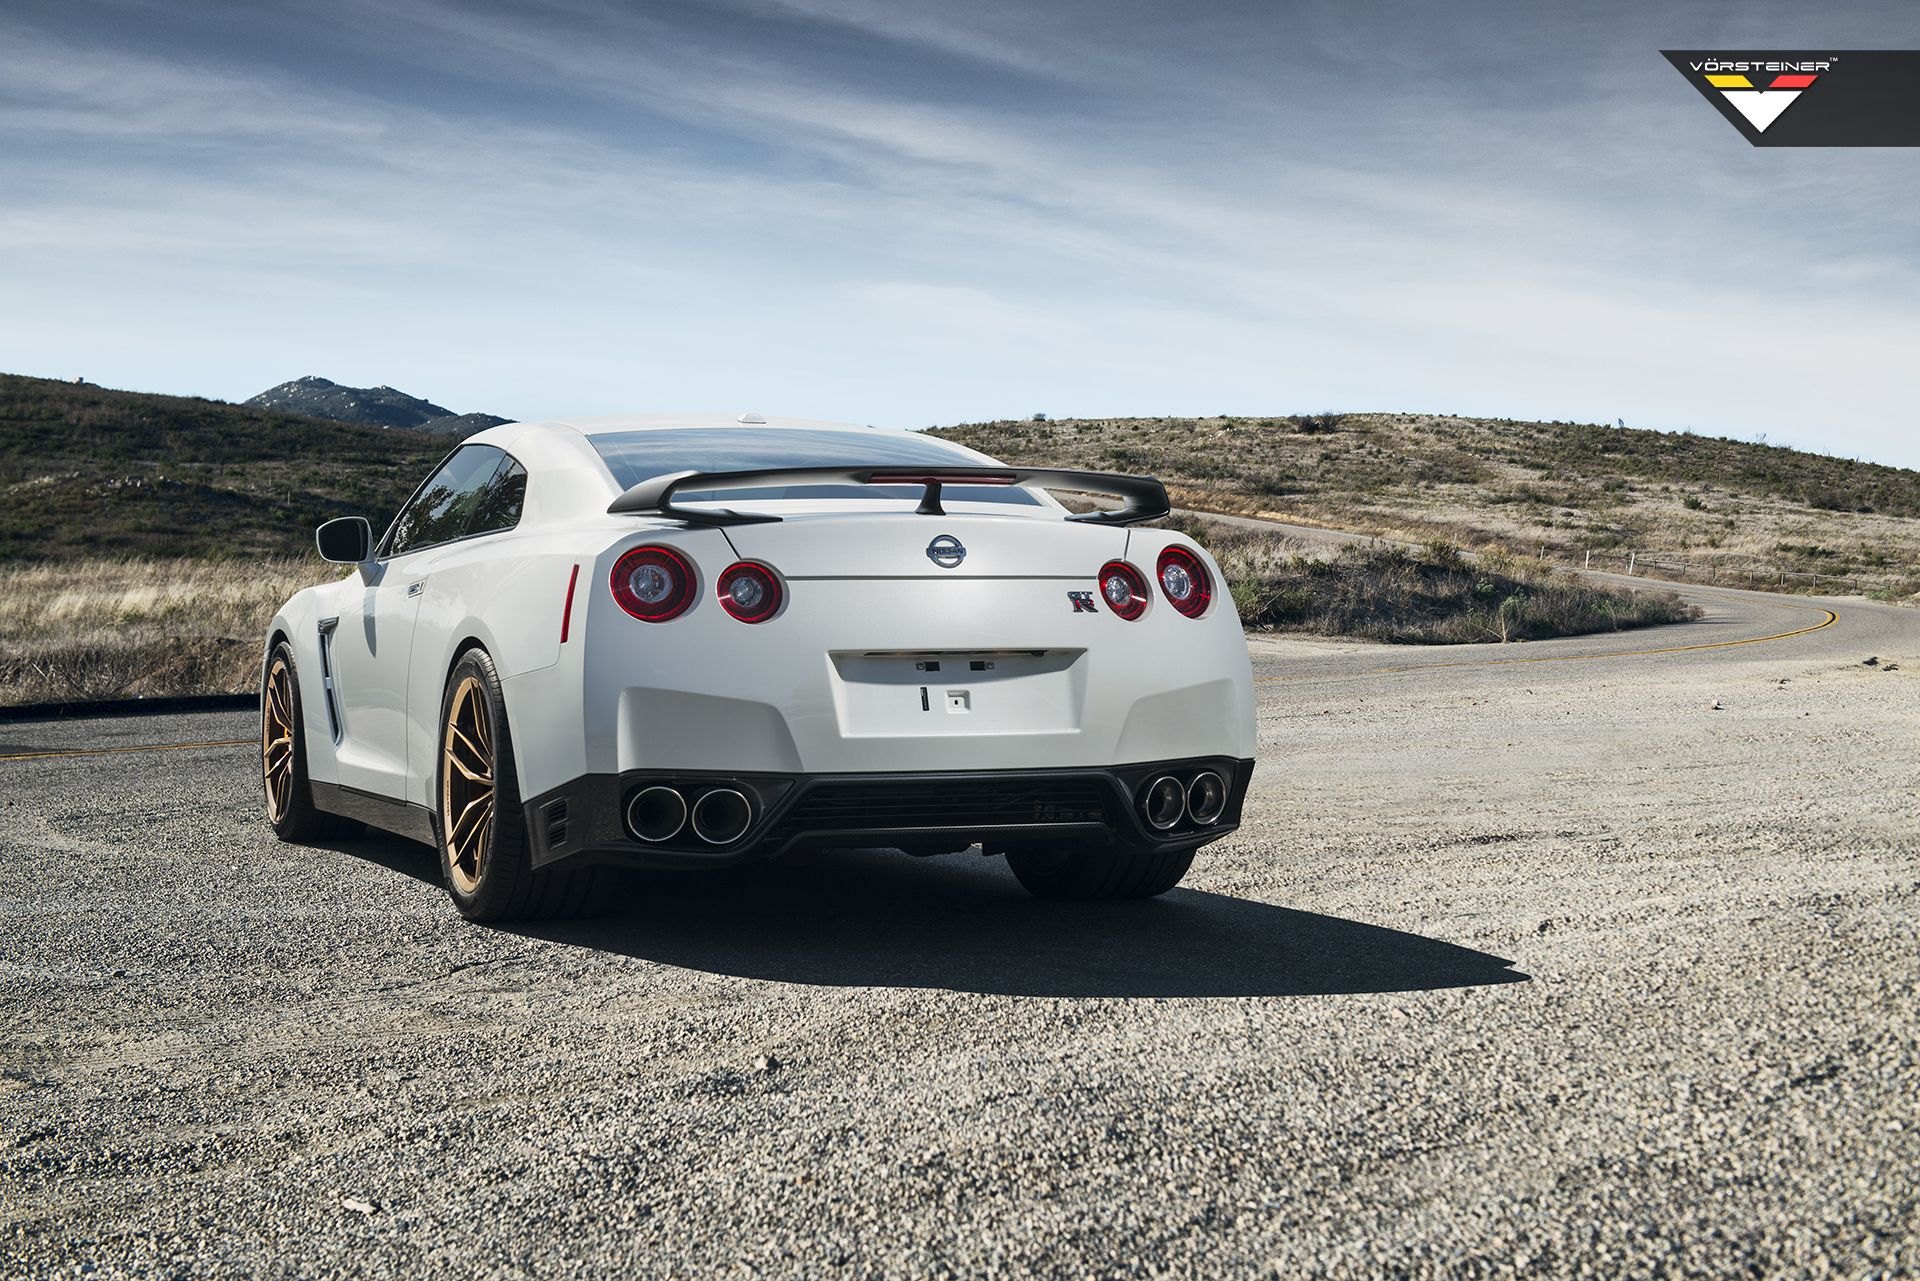 White Nissan GT-R with Aftermarket Rear Spoiler - Photo by Vorstiner